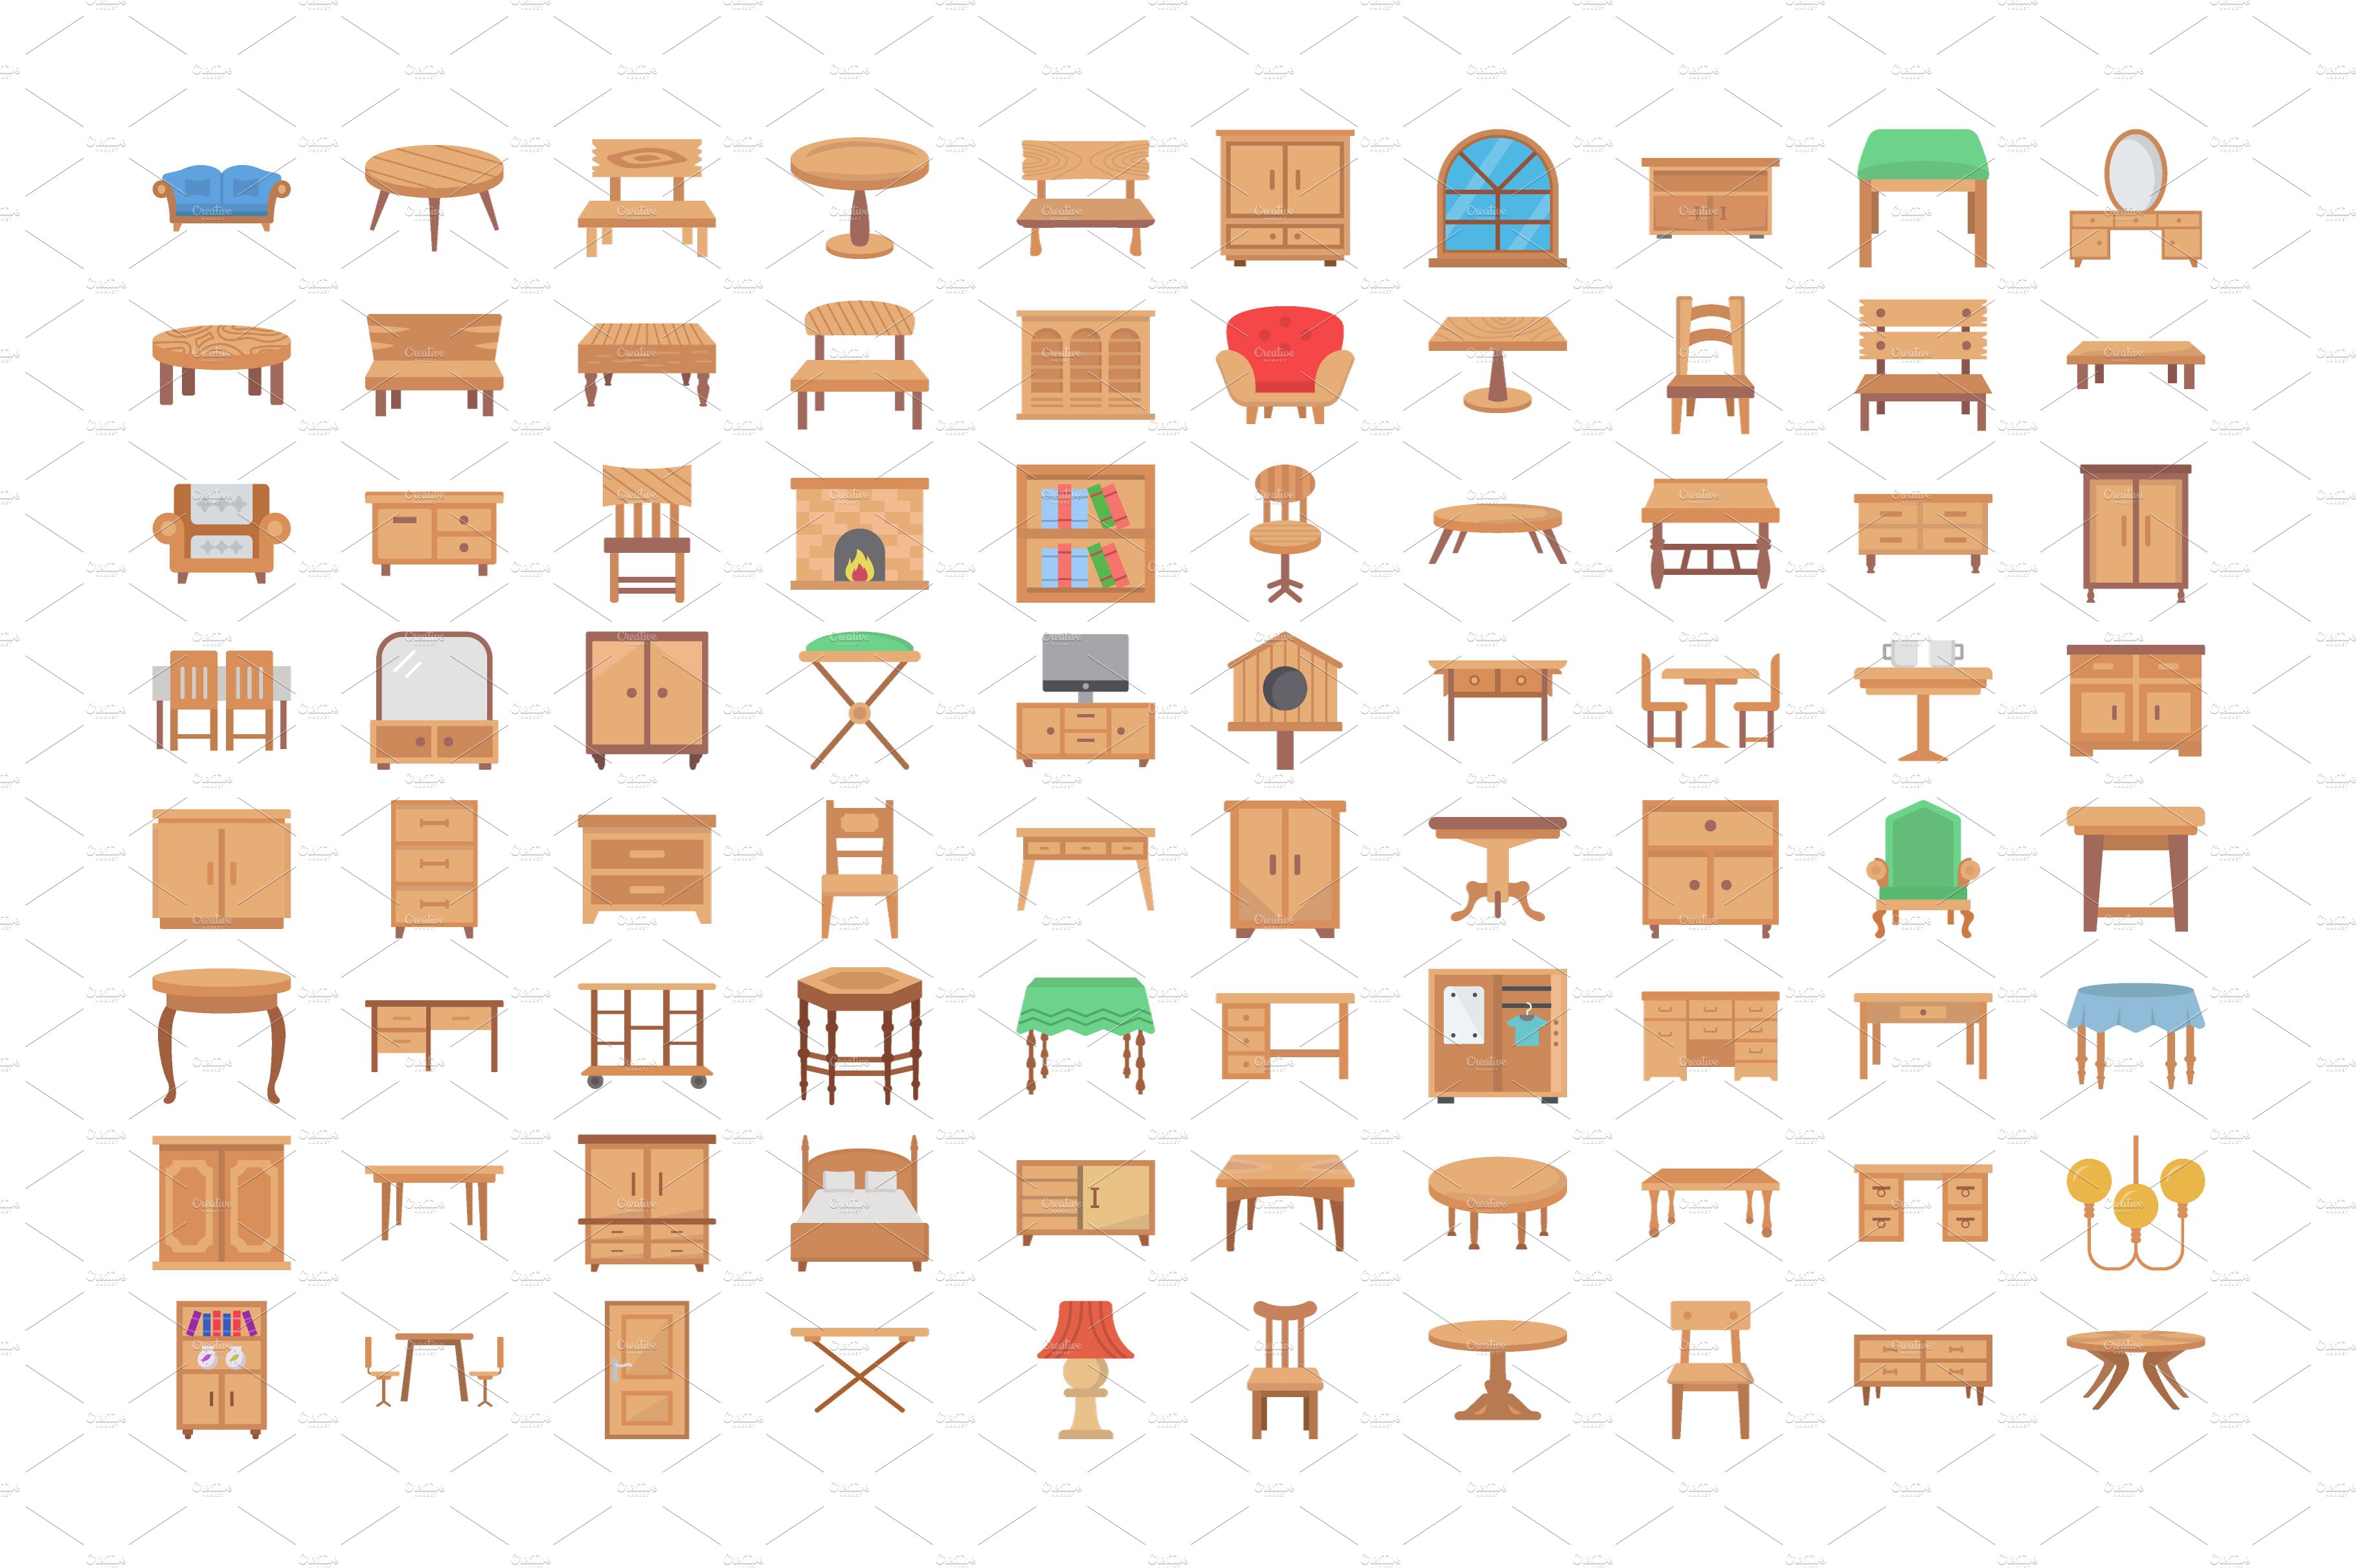 80 Wooden Furniture Vector Icons cover image.